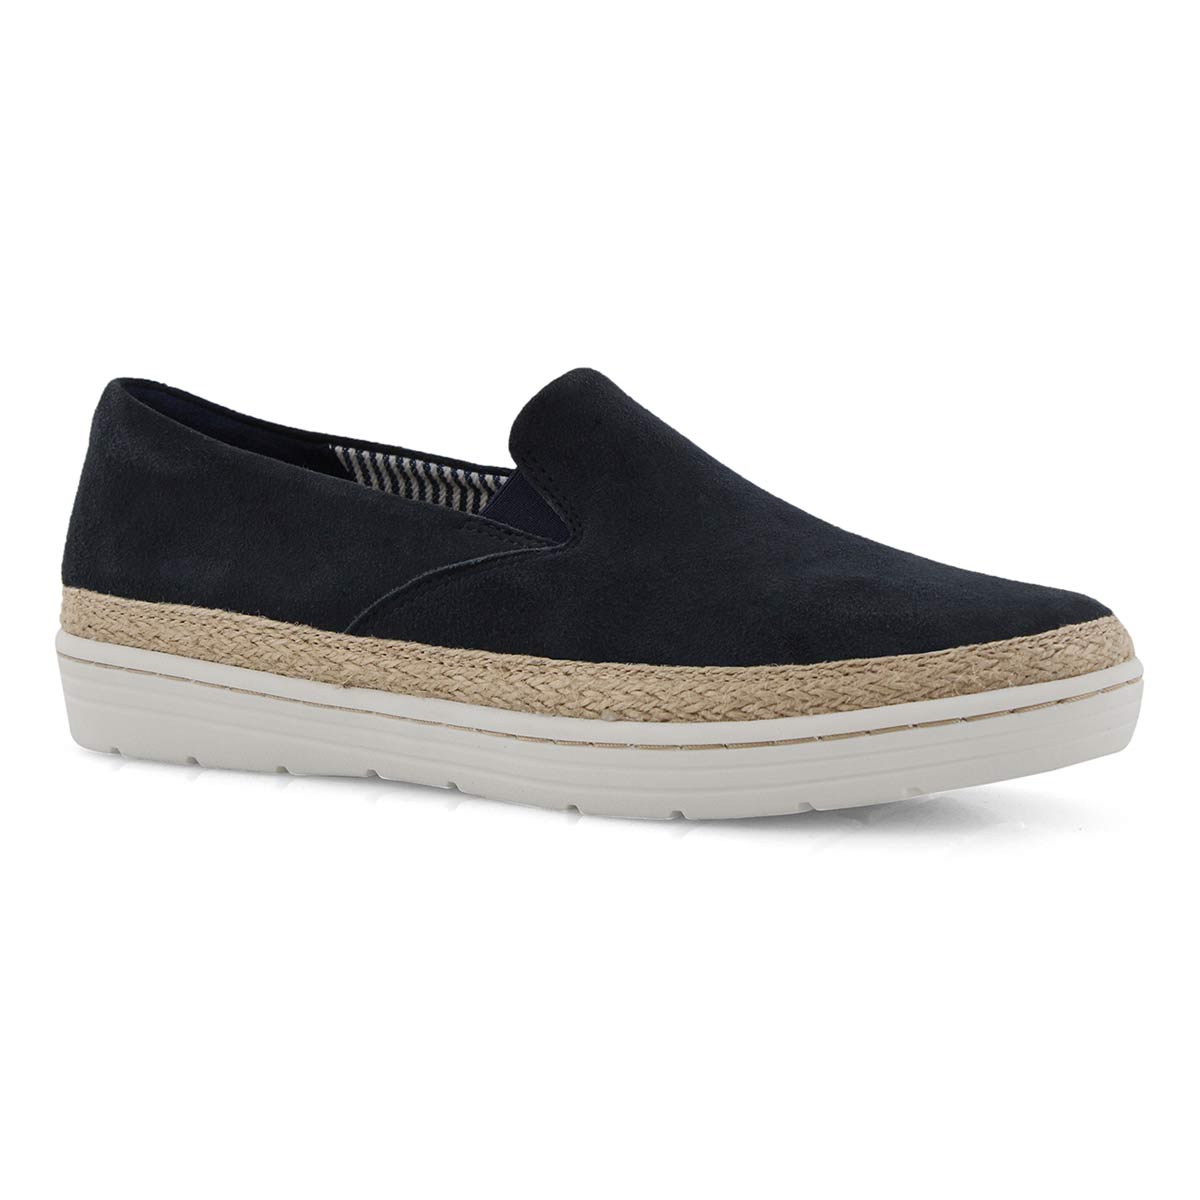 clarks casual shoes